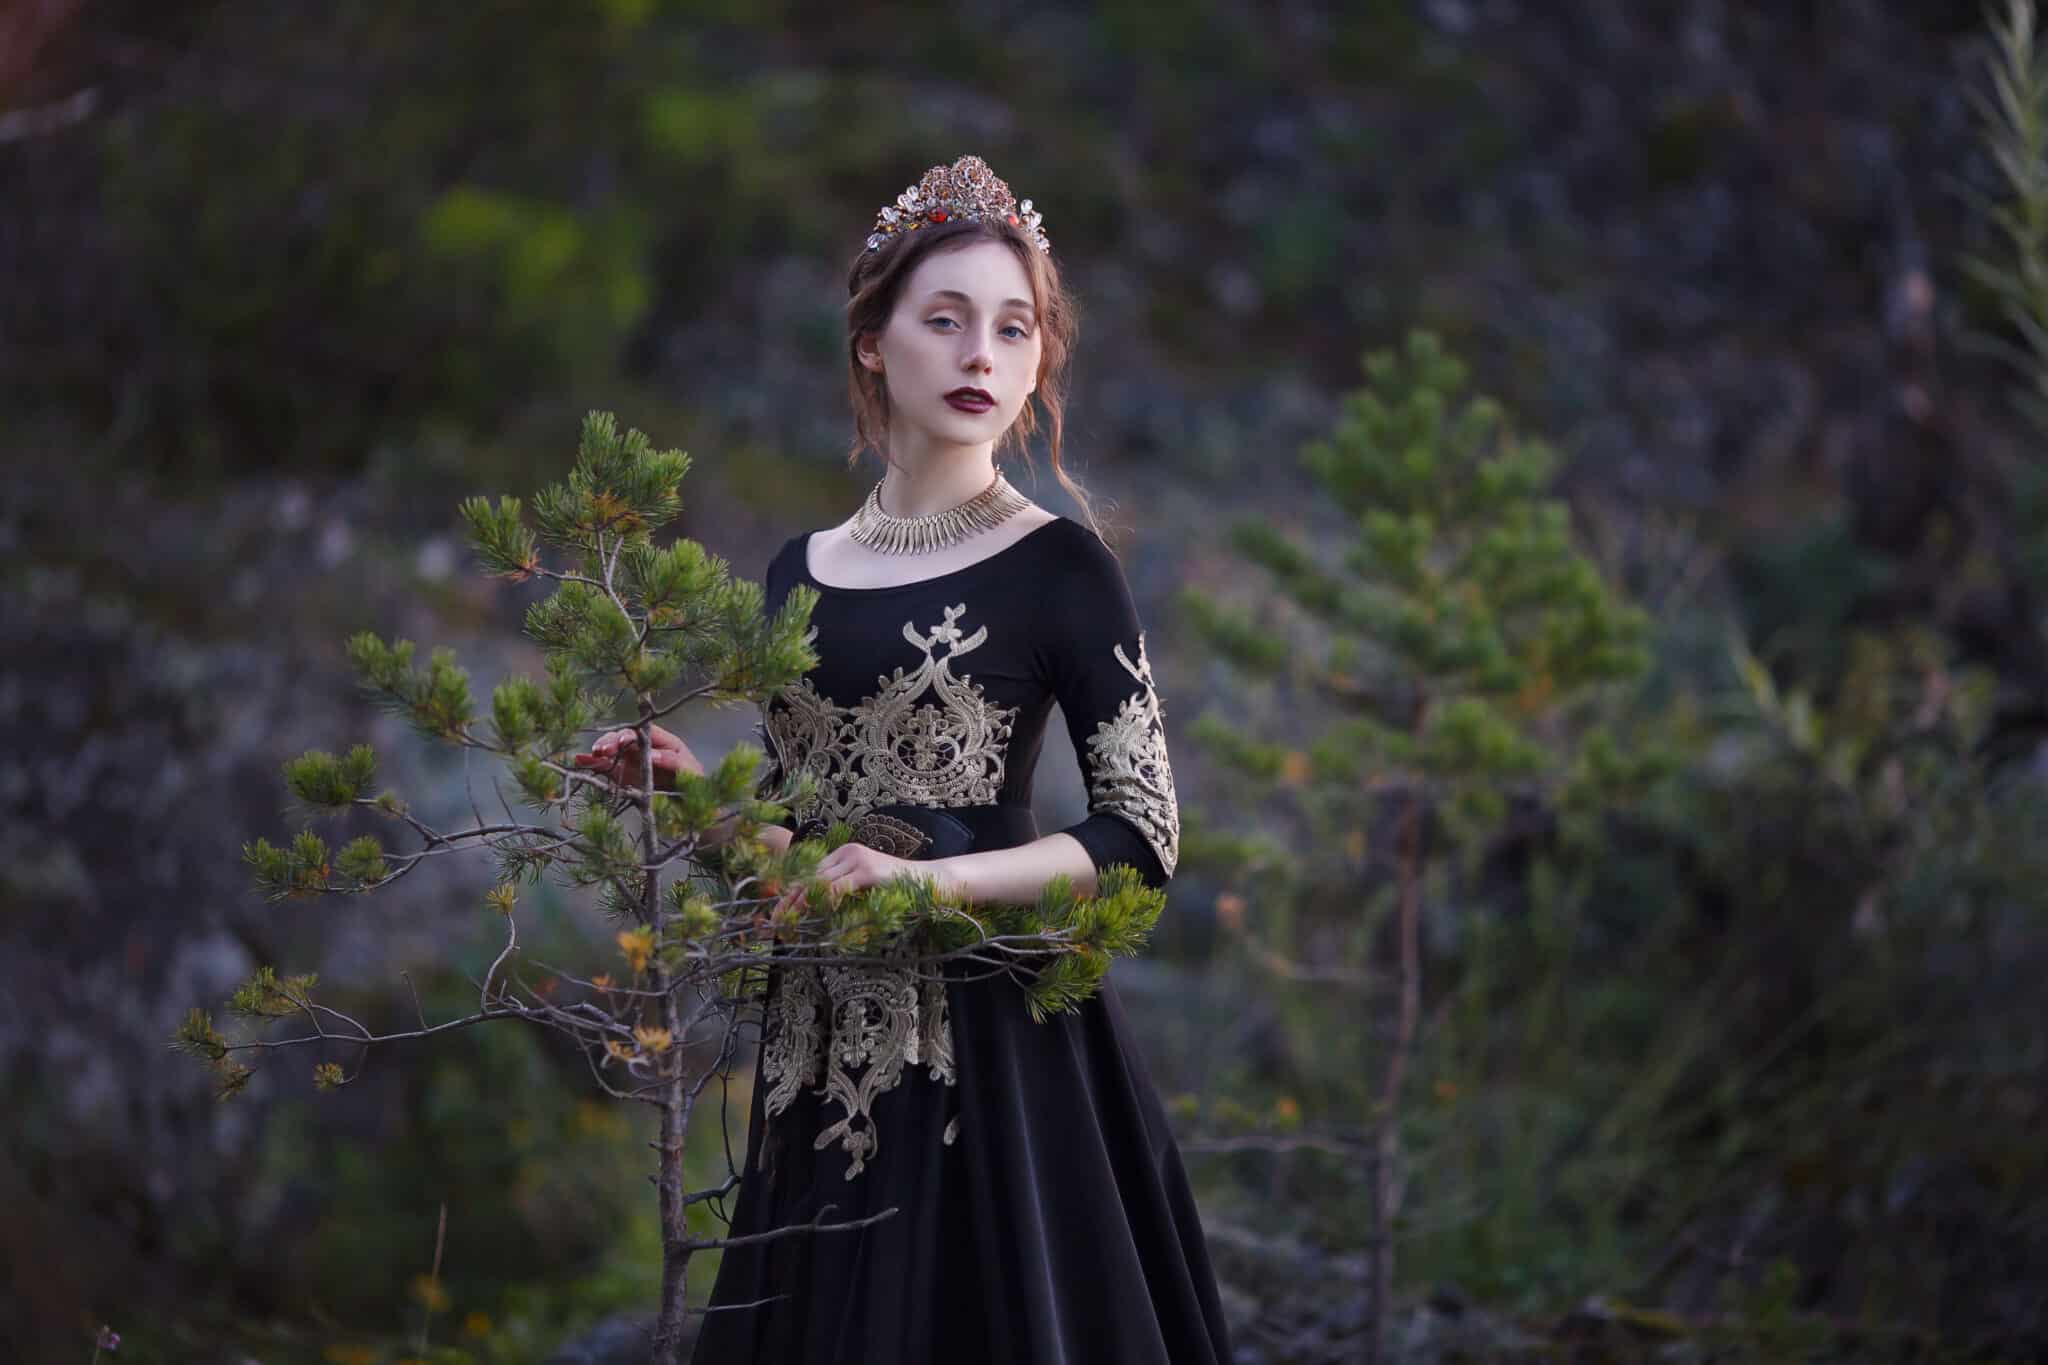 sad young woman in a black dress with a crown on her head stands on the banks of the river